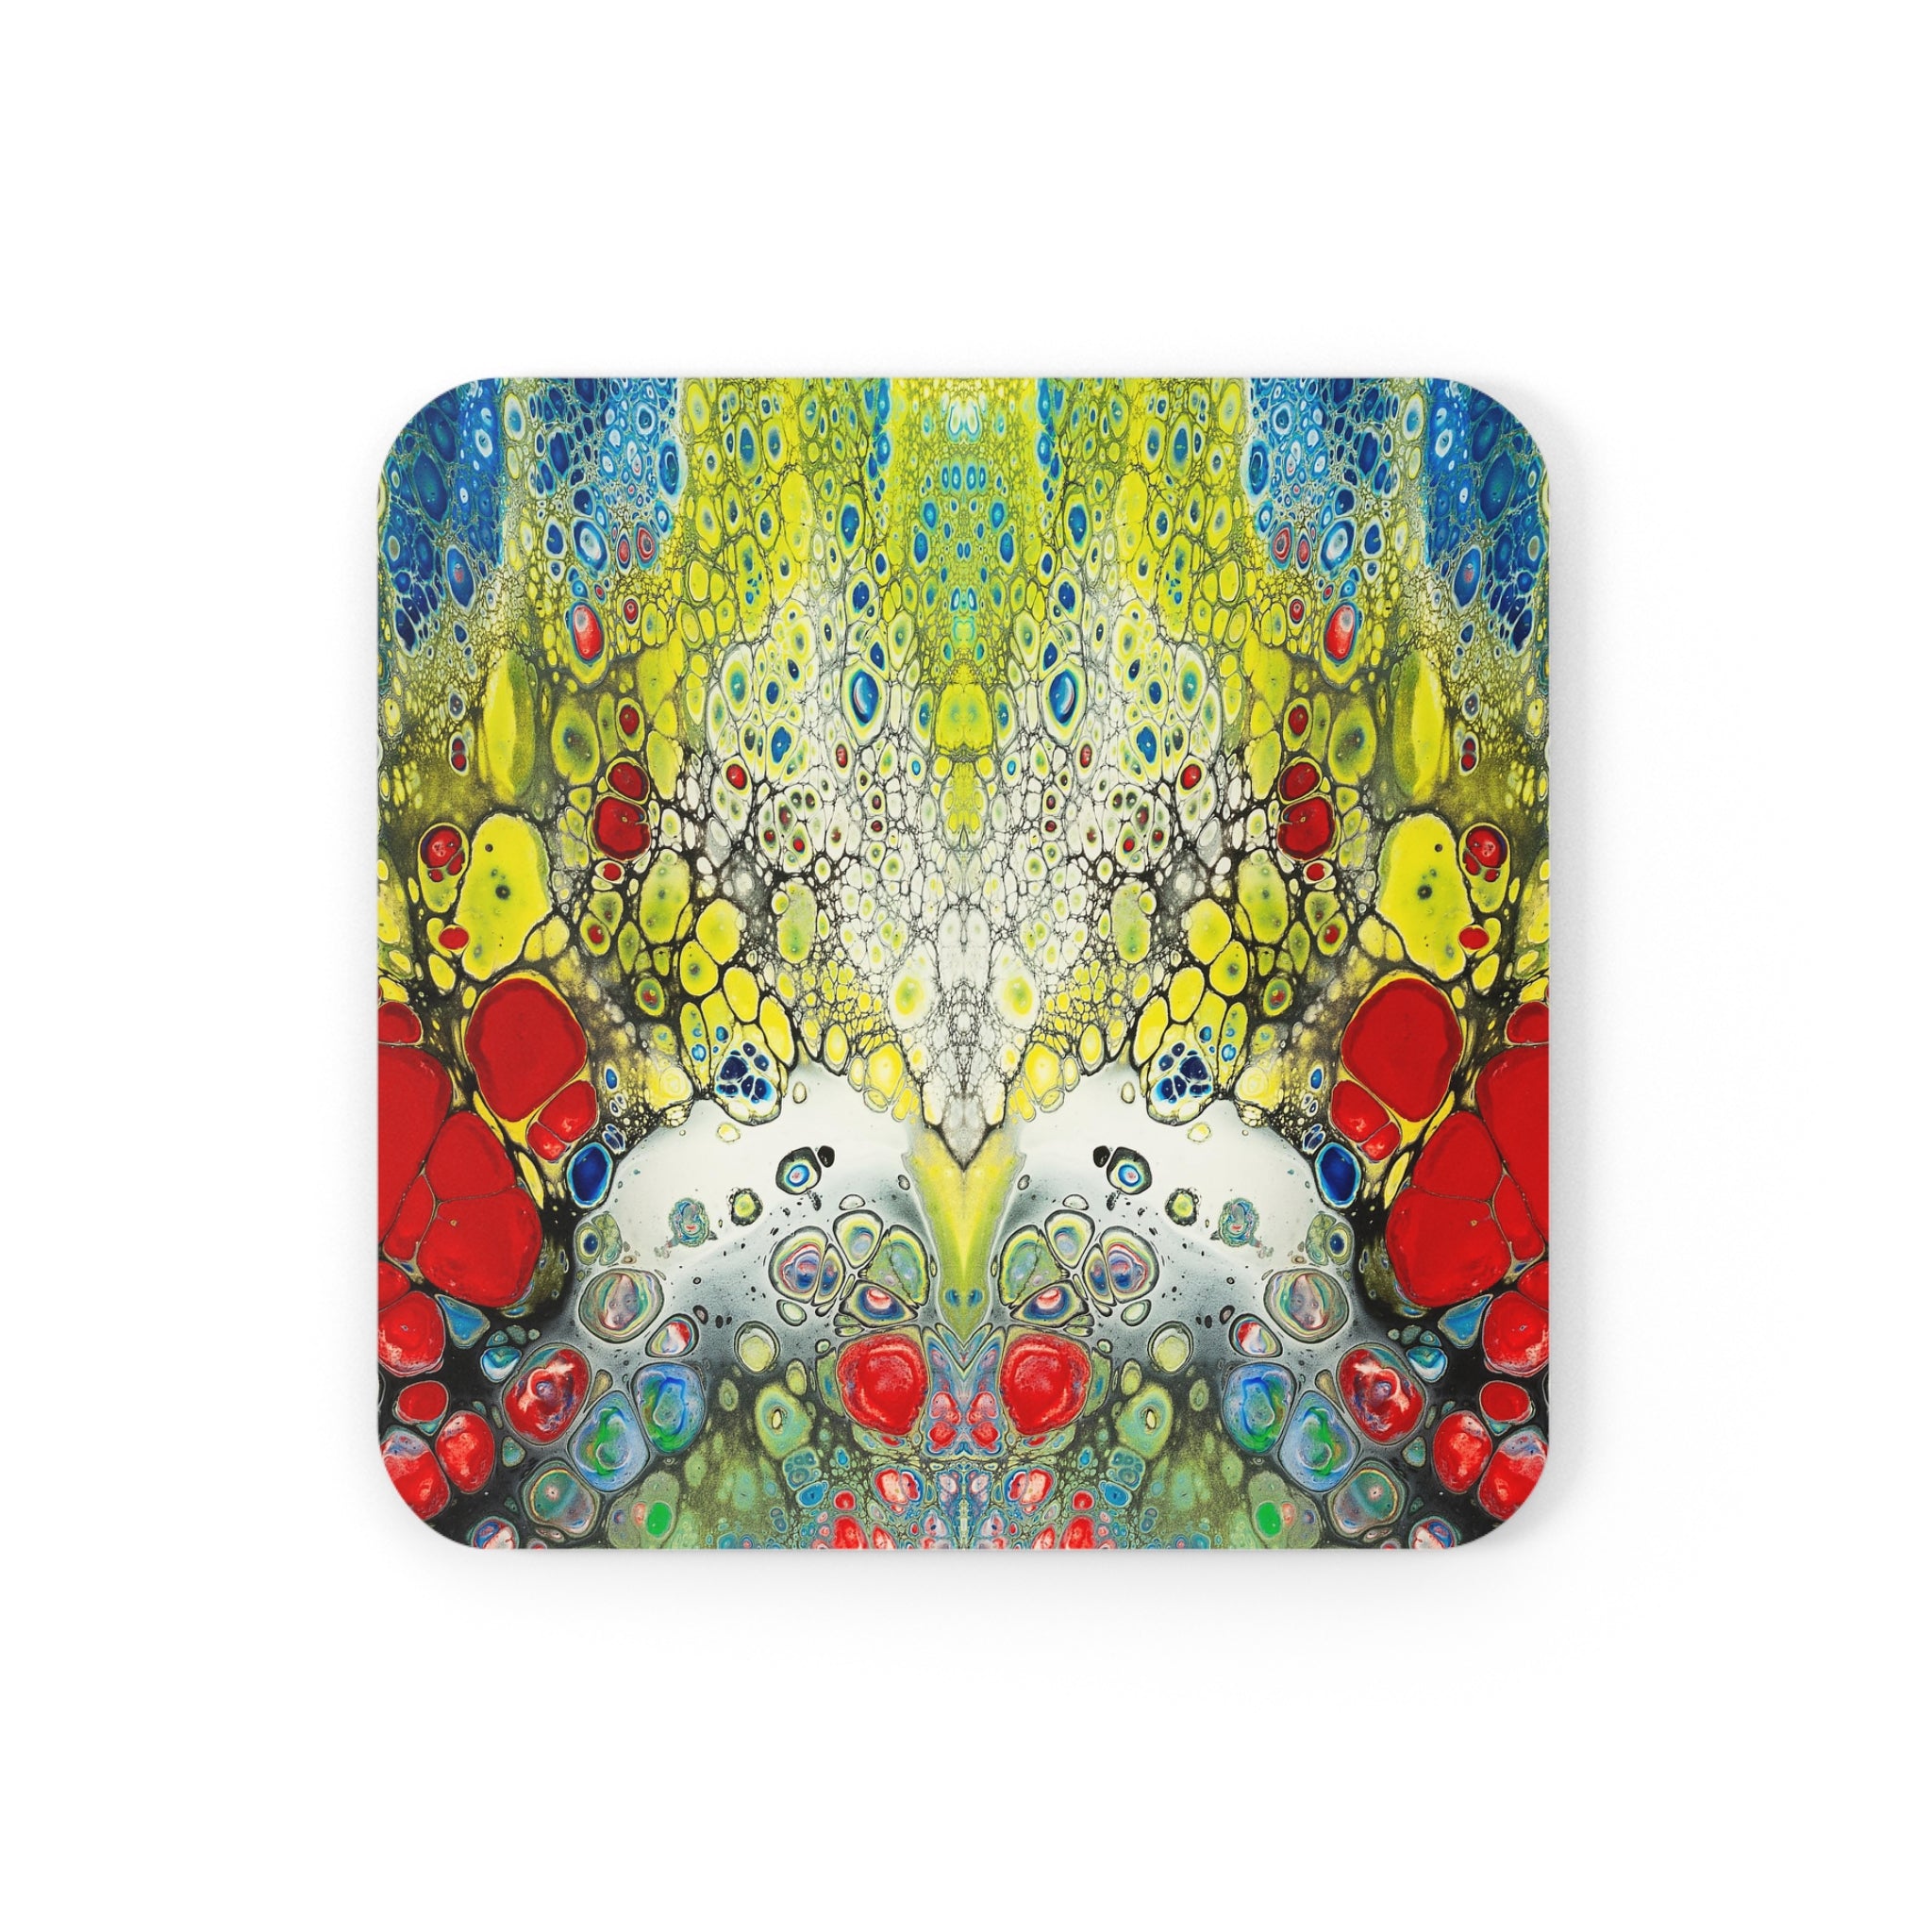 Cameron Creations - Bubblicious - Stylish Coffee Coaster - Square Front